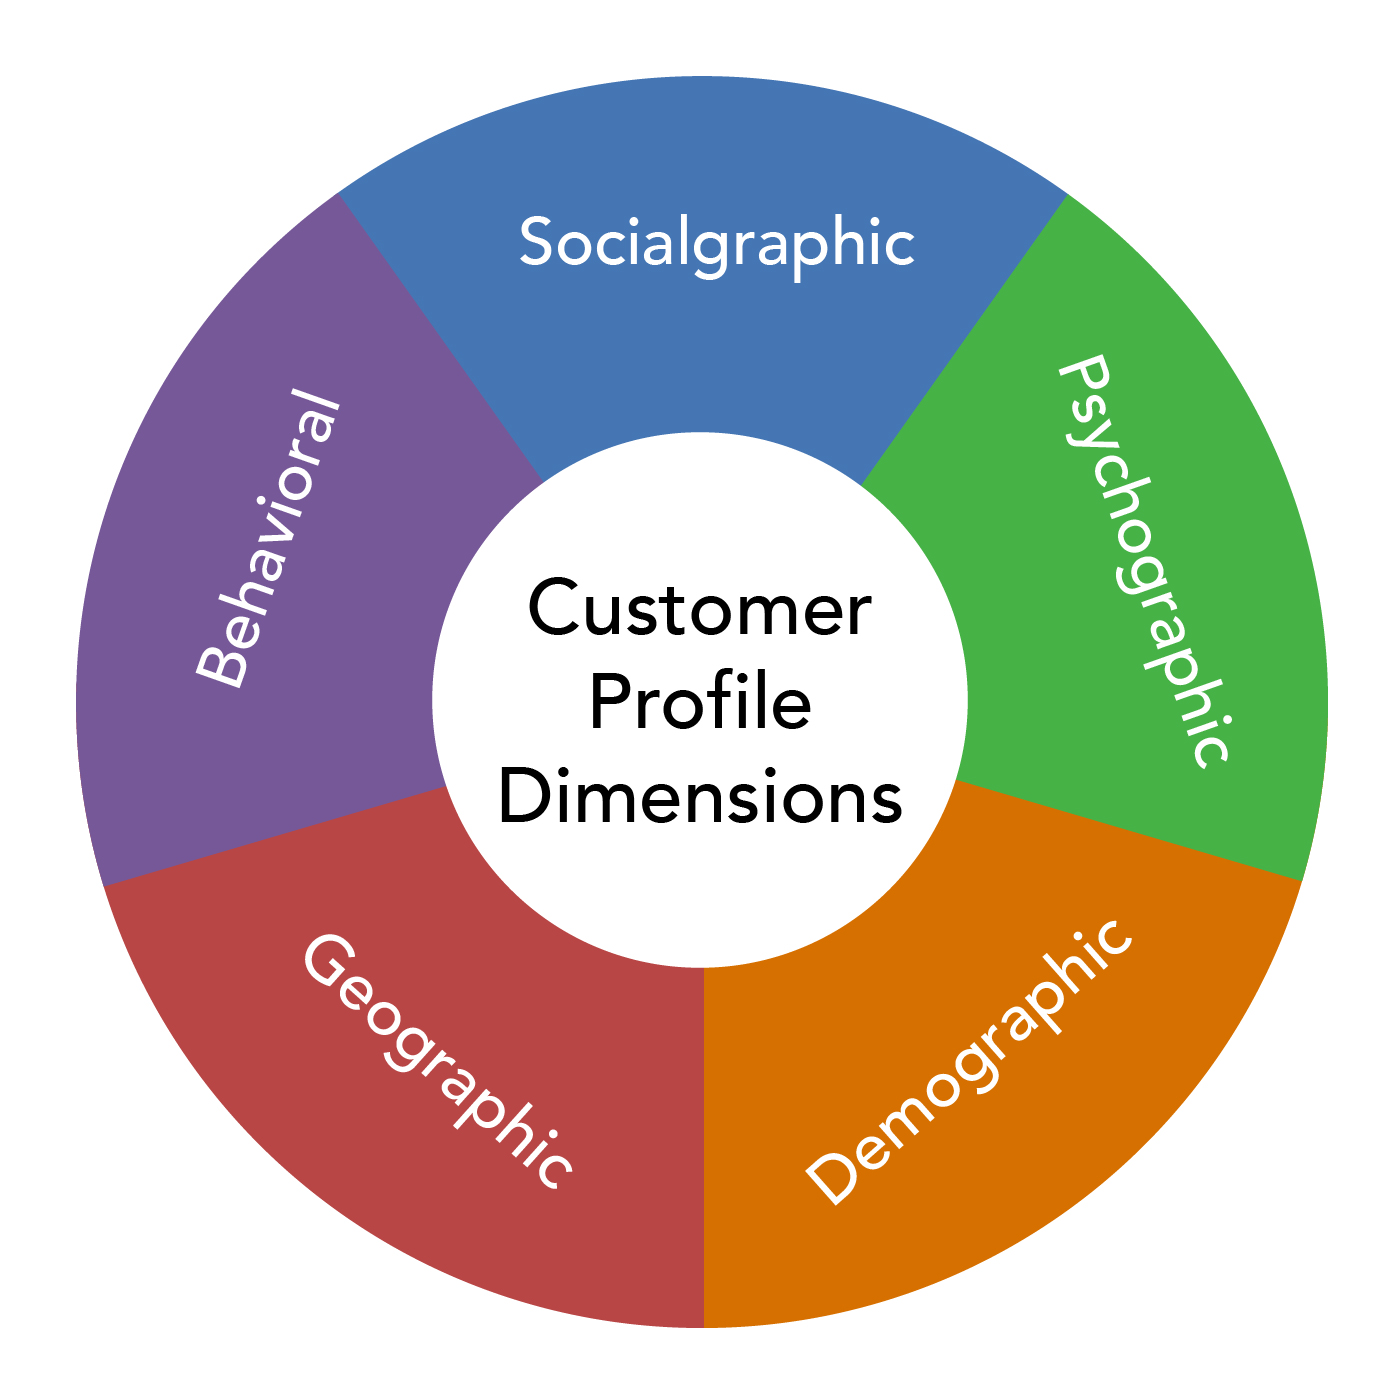 Graphic showing the dimensions of a customer profile. These are: socialgraphic, behavioral, psychographic, geographic, demographic.